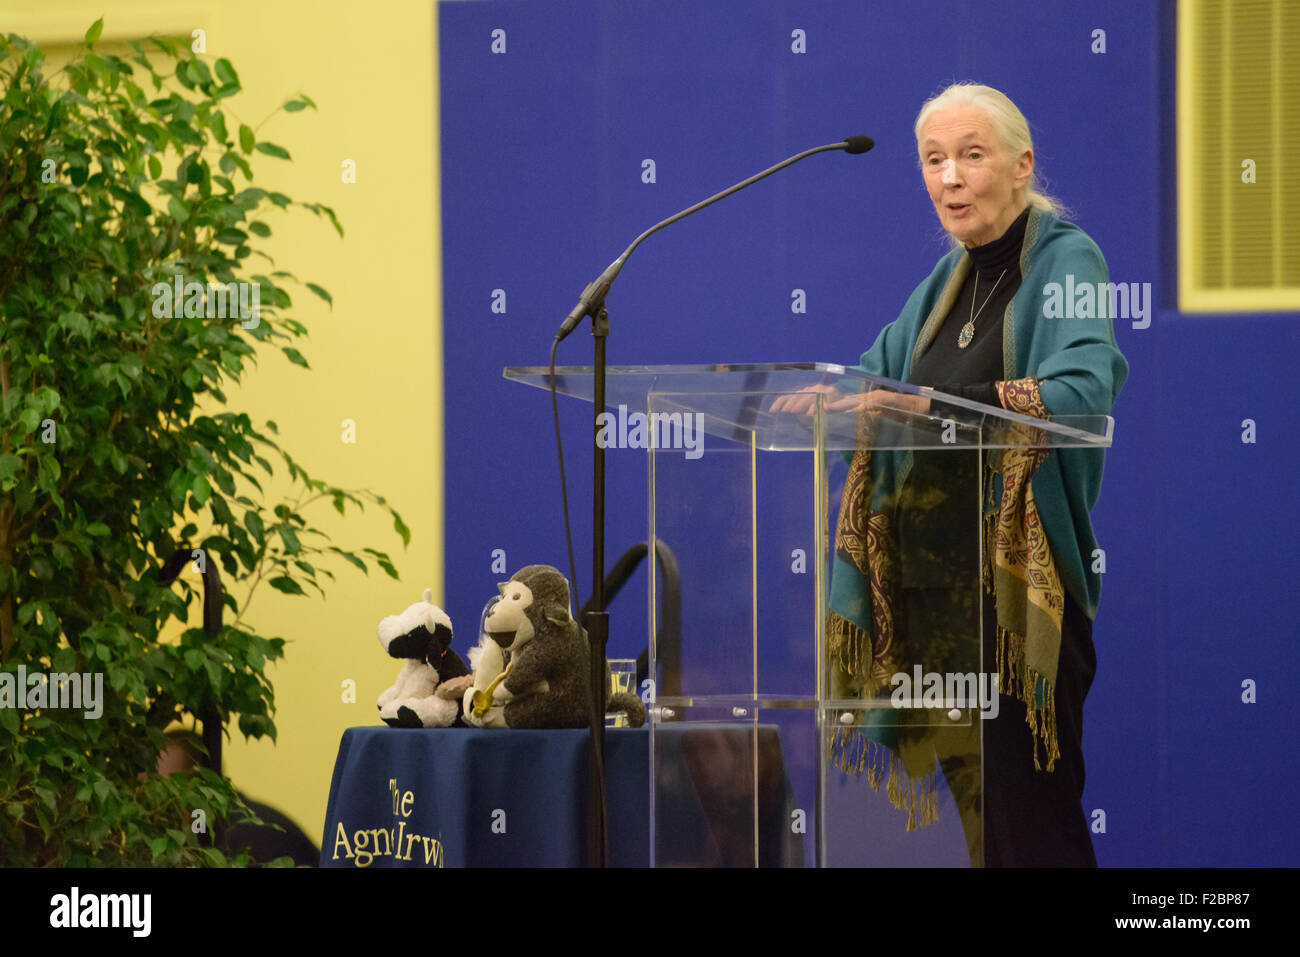 Rosemont, Pennsylvania, USA. 15th Sep, 2015. Dr. Jane Goodall, DBE, one of the world's most renowned conservationists, delivering a lecture, 'Sowing the Seeds of Hope,' about her groundbreaking work studying chimpanzees in the wild and her longstanding efforts to protect the environment at The Agnes Irwin School. Credit:  Kelleher Photography/Alamy Live News Stock Photo